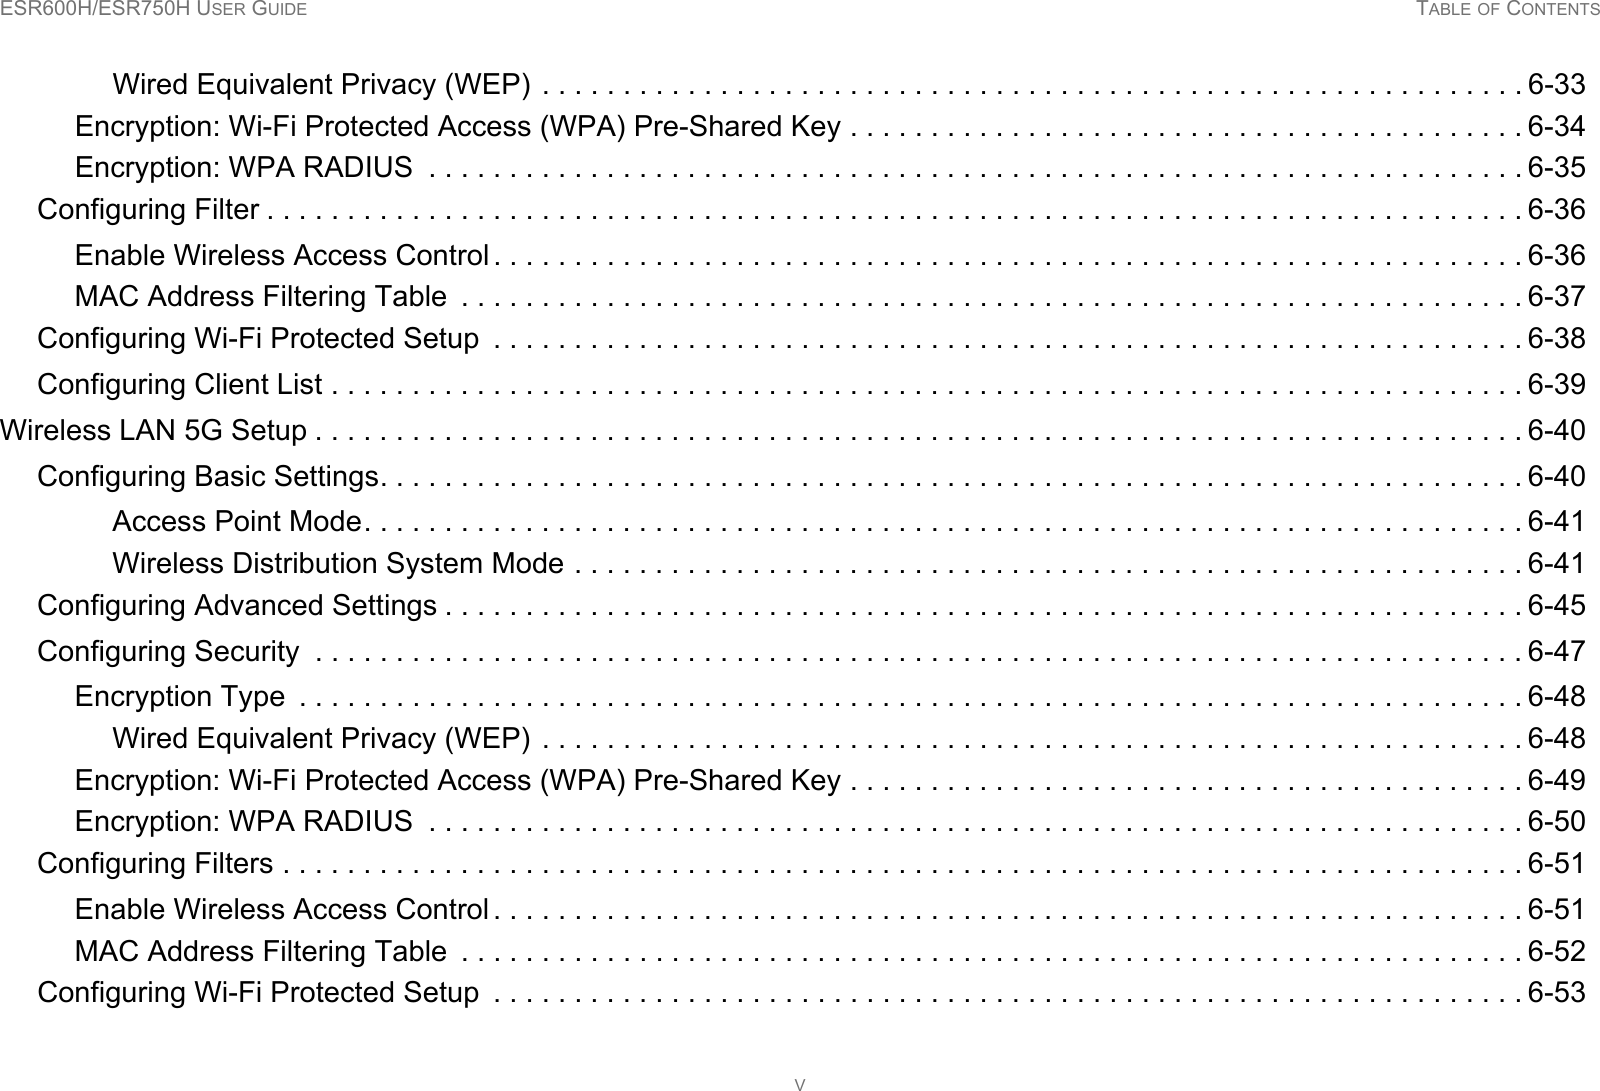 ESR600H/ESR750H USER GUIDE TABLE OF CONTENTSVWired Equivalent Privacy (WEP)  . . . . . . . . . . . . . . . . . . . . . . . . . . . . . . . . . . . . . . . . . . . . . . . . . . . . . . . . . . . . . 6-33Encryption: Wi-Fi Protected Access (WPA) Pre-Shared Key . . . . . . . . . . . . . . . . . . . . . . . . . . . . . . . . . . . . . . . . . . 6-34Encryption: WPA RADIUS  . . . . . . . . . . . . . . . . . . . . . . . . . . . . . . . . . . . . . . . . . . . . . . . . . . . . . . . . . . . . . . . . . . . . 6-35Configuring Filter . . . . . . . . . . . . . . . . . . . . . . . . . . . . . . . . . . . . . . . . . . . . . . . . . . . . . . . . . . . . . . . . . . . . . . . . . . . . . . 6-36Enable Wireless Access Control . . . . . . . . . . . . . . . . . . . . . . . . . . . . . . . . . . . . . . . . . . . . . . . . . . . . . . . . . . . . . . . . 6-36MAC Address Filtering Table  . . . . . . . . . . . . . . . . . . . . . . . . . . . . . . . . . . . . . . . . . . . . . . . . . . . . . . . . . . . . . . . . . . 6-37Configuring Wi-Fi Protected Setup  . . . . . . . . . . . . . . . . . . . . . . . . . . . . . . . . . . . . . . . . . . . . . . . . . . . . . . . . . . . . . . . . 6-38Configuring Client List . . . . . . . . . . . . . . . . . . . . . . . . . . . . . . . . . . . . . . . . . . . . . . . . . . . . . . . . . . . . . . . . . . . . . . . . . . 6-39Wireless LAN 5G Setup . . . . . . . . . . . . . . . . . . . . . . . . . . . . . . . . . . . . . . . . . . . . . . . . . . . . . . . . . . . . . . . . . . . . . . . . . . . 6-40Configuring Basic Settings. . . . . . . . . . . . . . . . . . . . . . . . . . . . . . . . . . . . . . . . . . . . . . . . . . . . . . . . . . . . . . . . . . . . . . . 6-40Access Point Mode. . . . . . . . . . . . . . . . . . . . . . . . . . . . . . . . . . . . . . . . . . . . . . . . . . . . . . . . . . . . . . . . . . . . . . . . 6-41Wireless Distribution System Mode . . . . . . . . . . . . . . . . . . . . . . . . . . . . . . . . . . . . . . . . . . . . . . . . . . . . . . . . . . . 6-41Configuring Advanced Settings . . . . . . . . . . . . . . . . . . . . . . . . . . . . . . . . . . . . . . . . . . . . . . . . . . . . . . . . . . . . . . . . . . . 6-45Configuring Security  . . . . . . . . . . . . . . . . . . . . . . . . . . . . . . . . . . . . . . . . . . . . . . . . . . . . . . . . . . . . . . . . . . . . . . . . . . . 6-47Encryption Type  . . . . . . . . . . . . . . . . . . . . . . . . . . . . . . . . . . . . . . . . . . . . . . . . . . . . . . . . . . . . . . . . . . . . . . . . . . . . 6-48Wired Equivalent Privacy (WEP)  . . . . . . . . . . . . . . . . . . . . . . . . . . . . . . . . . . . . . . . . . . . . . . . . . . . . . . . . . . . . . 6-48Encryption: Wi-Fi Protected Access (WPA) Pre-Shared Key . . . . . . . . . . . . . . . . . . . . . . . . . . . . . . . . . . . . . . . . . . 6-49Encryption: WPA RADIUS  . . . . . . . . . . . . . . . . . . . . . . . . . . . . . . . . . . . . . . . . . . . . . . . . . . . . . . . . . . . . . . . . . . . . 6-50Configuring Filters . . . . . . . . . . . . . . . . . . . . . . . . . . . . . . . . . . . . . . . . . . . . . . . . . . . . . . . . . . . . . . . . . . . . . . . . . . . . . 6-51Enable Wireless Access Control . . . . . . . . . . . . . . . . . . . . . . . . . . . . . . . . . . . . . . . . . . . . . . . . . . . . . . . . . . . . . . . . 6-51MAC Address Filtering Table . . . . . . . . . . . . . . . . . . . . . . . . . . . . . . . . . . . . . . . . . . . . . . . . . . . . . . . . . . . . . . . . . . 6-52Configuring Wi-Fi Protected Setup  . . . . . . . . . . . . . . . . . . . . . . . . . . . . . . . . . . . . . . . . . . . . . . . . . . . . . . . . . . . . . . . . 6-53